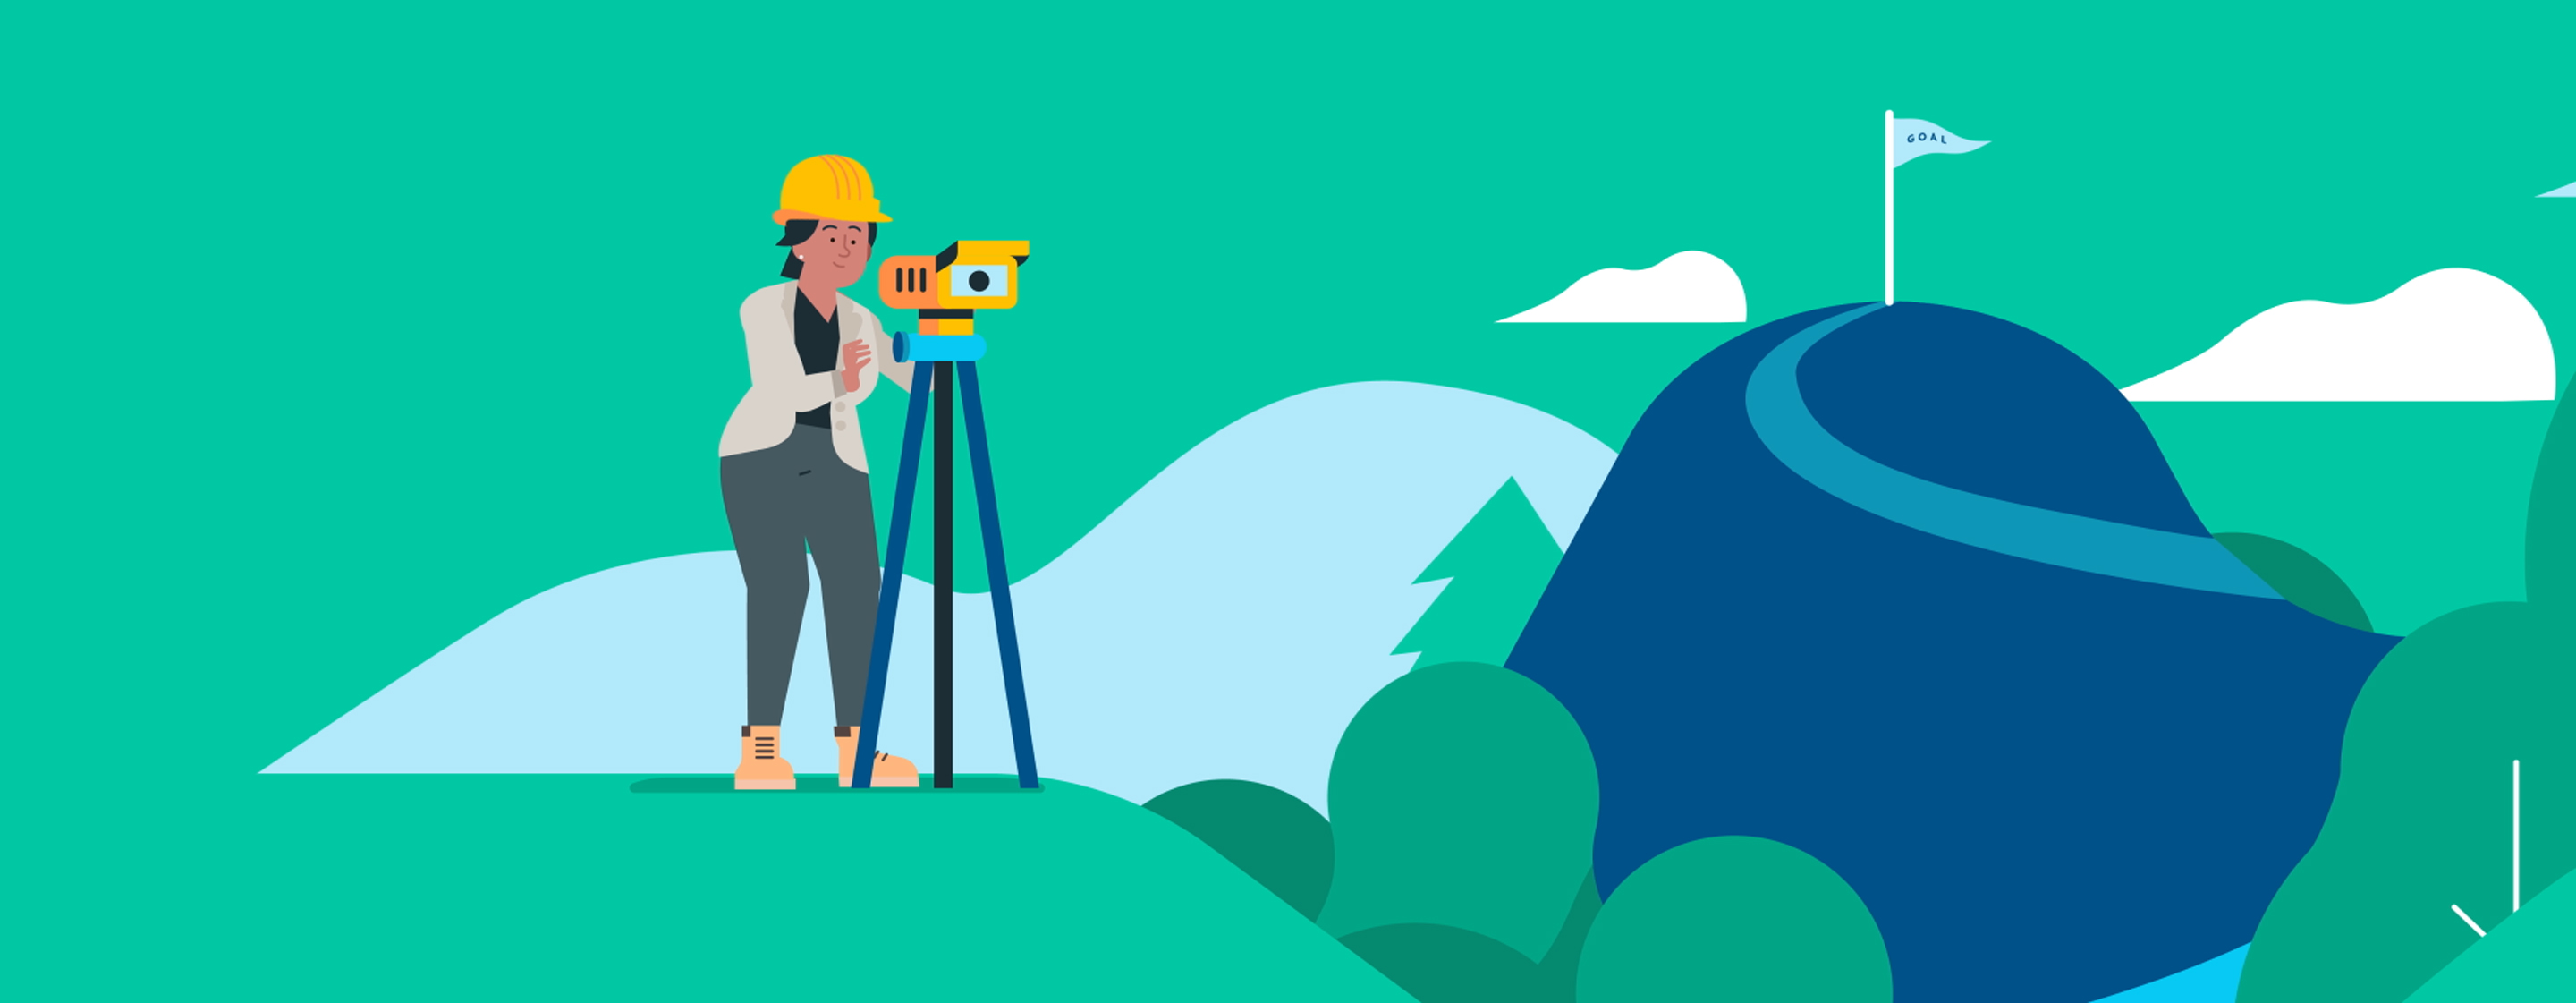 A graphic of a land surveyor working